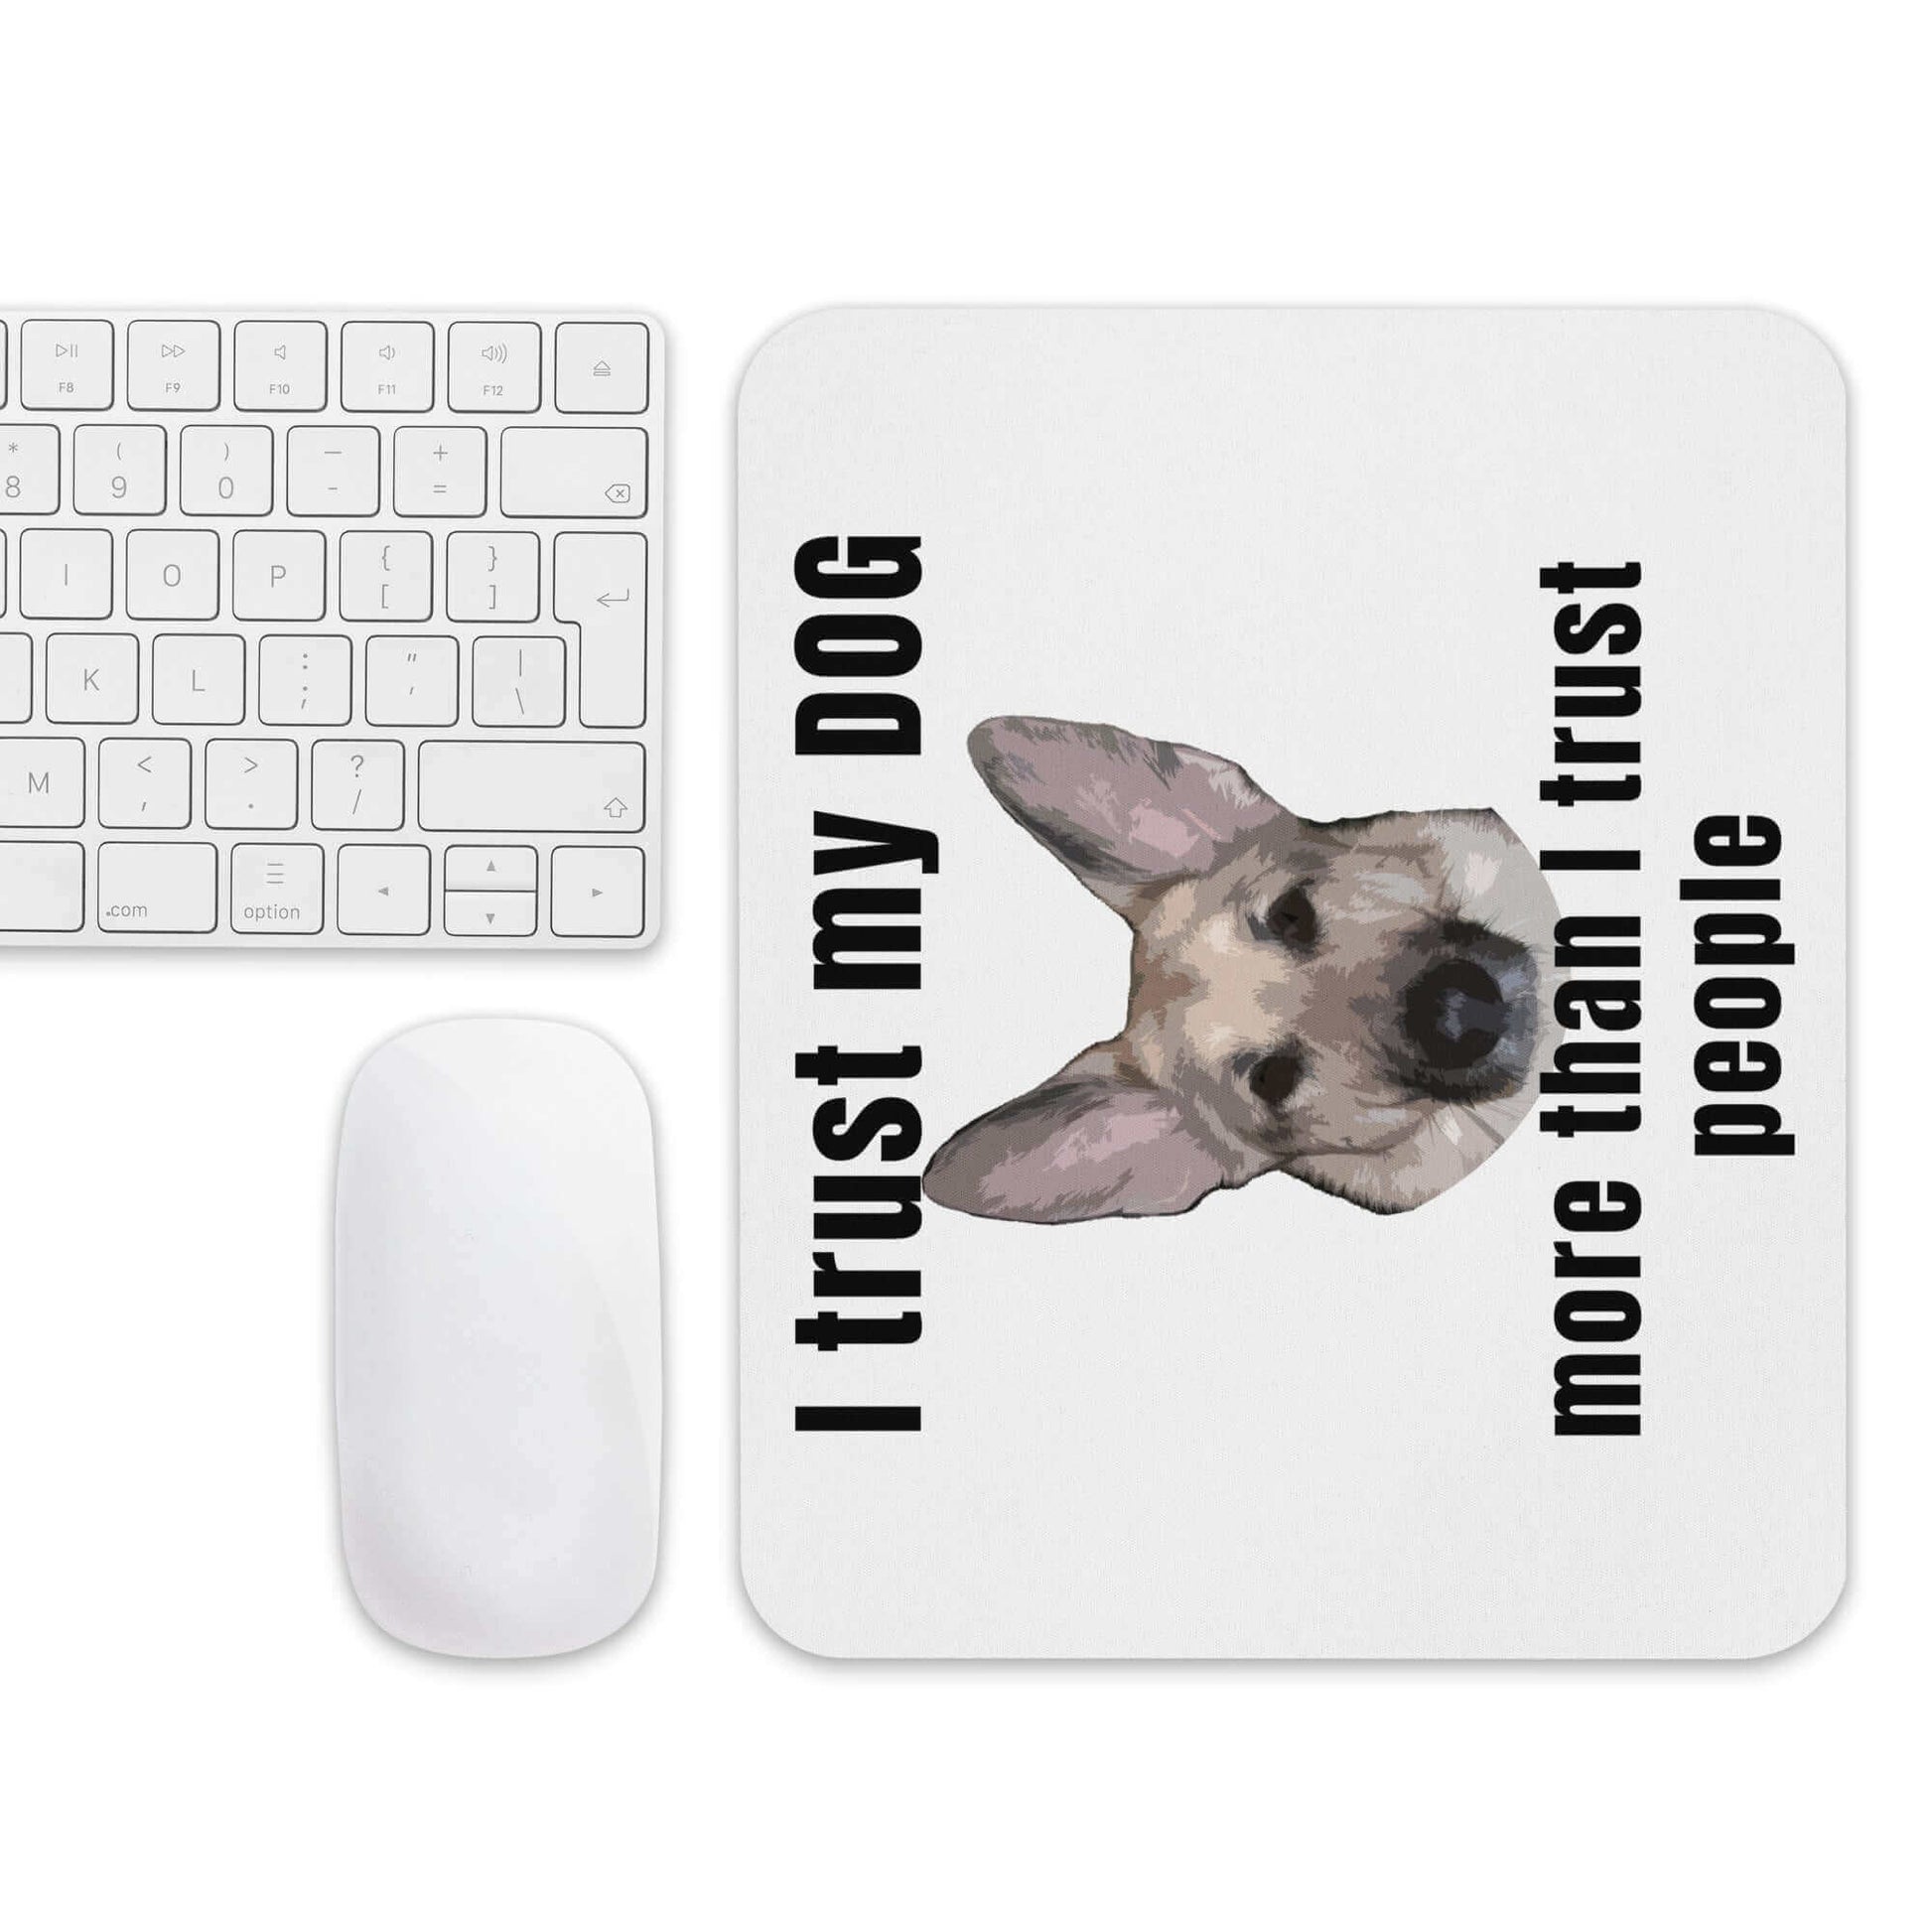 I trust my DOG more than I trust people - Mouse pad Custom Mouse Pad DOG German Shepherd GSD IT Mouse Pad Peopling Trust